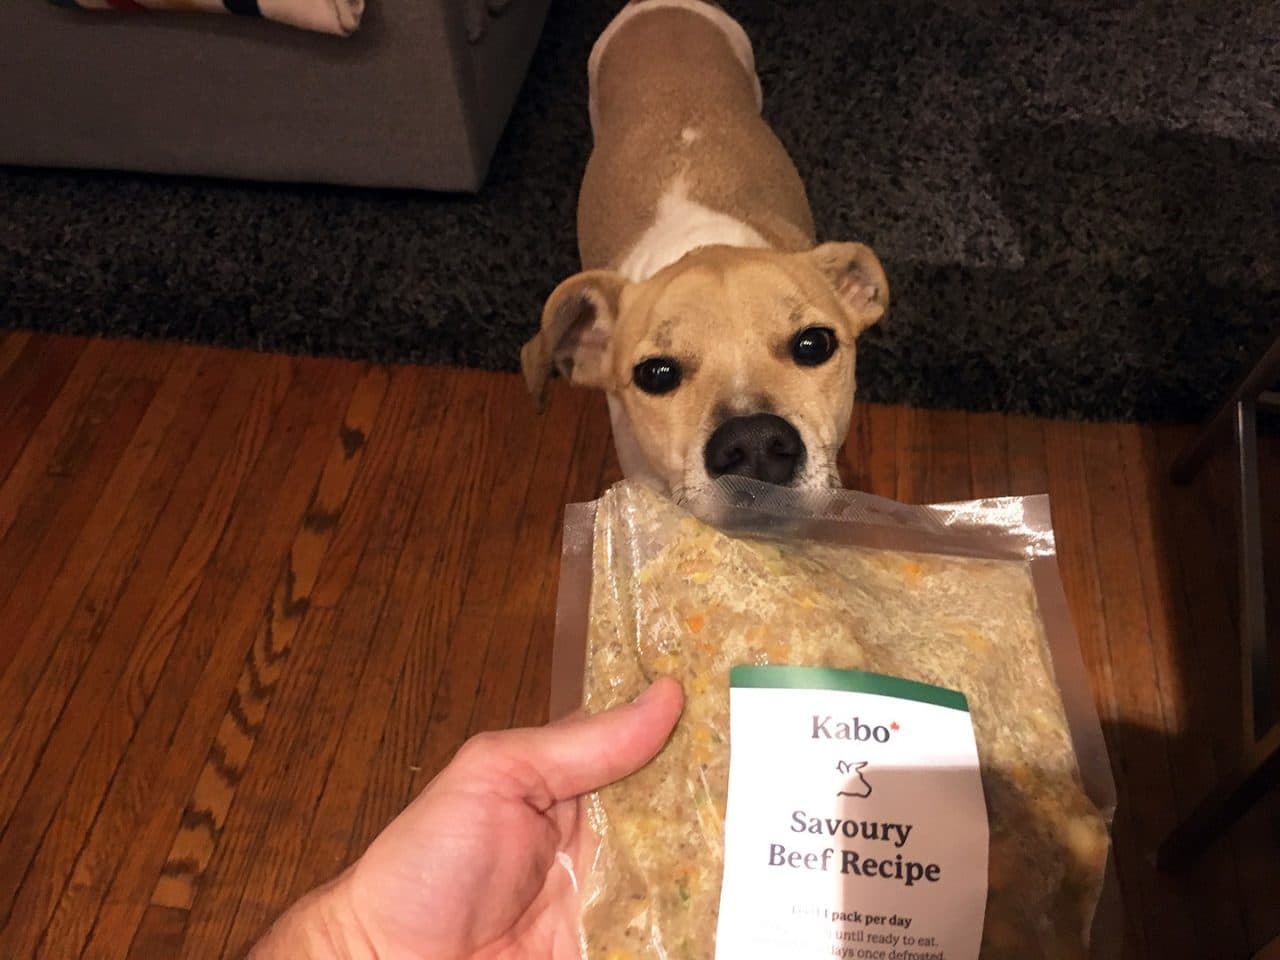 Kabo's PhD Pet Nutritionist-approved recipes are also Daisy-approved.